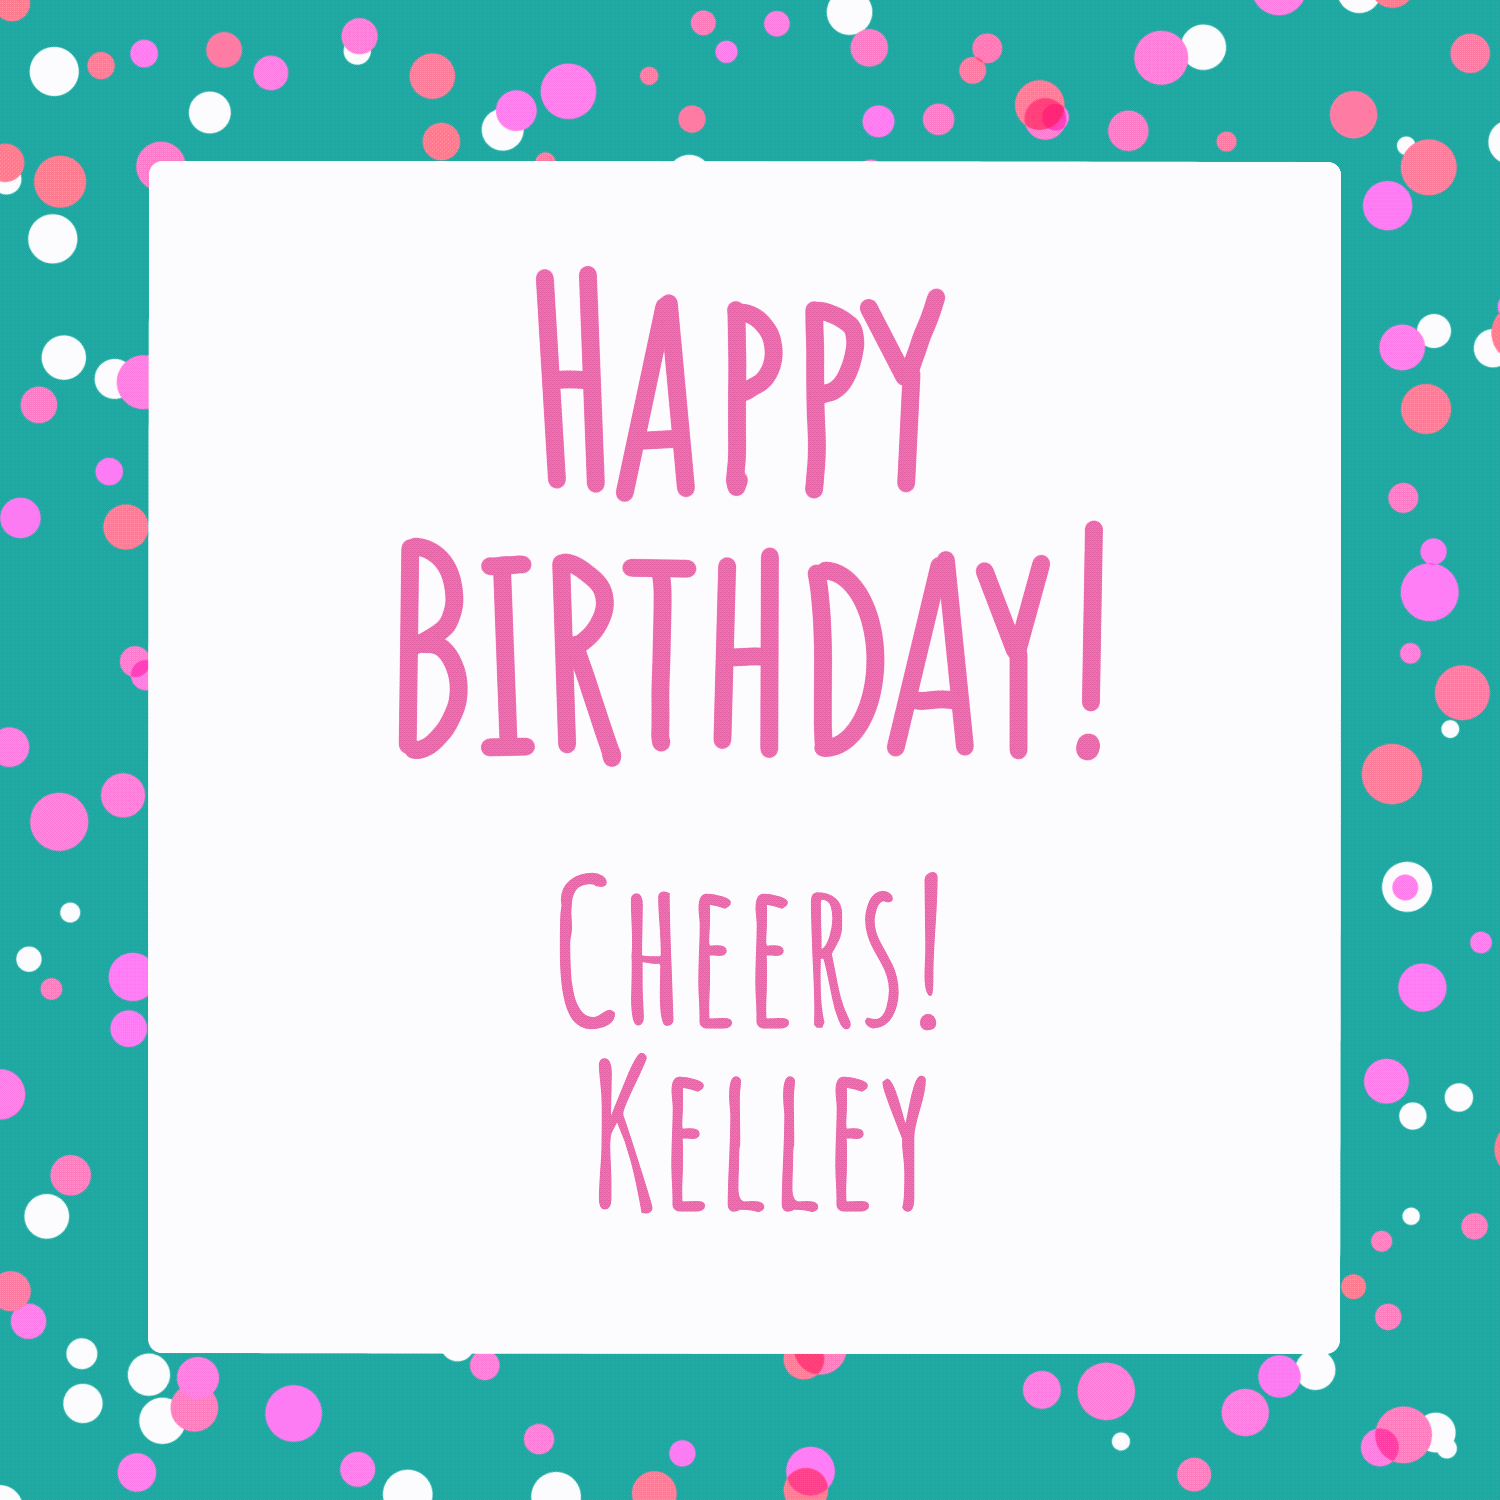 arup sarma recommends happy birthday kelly gif pic